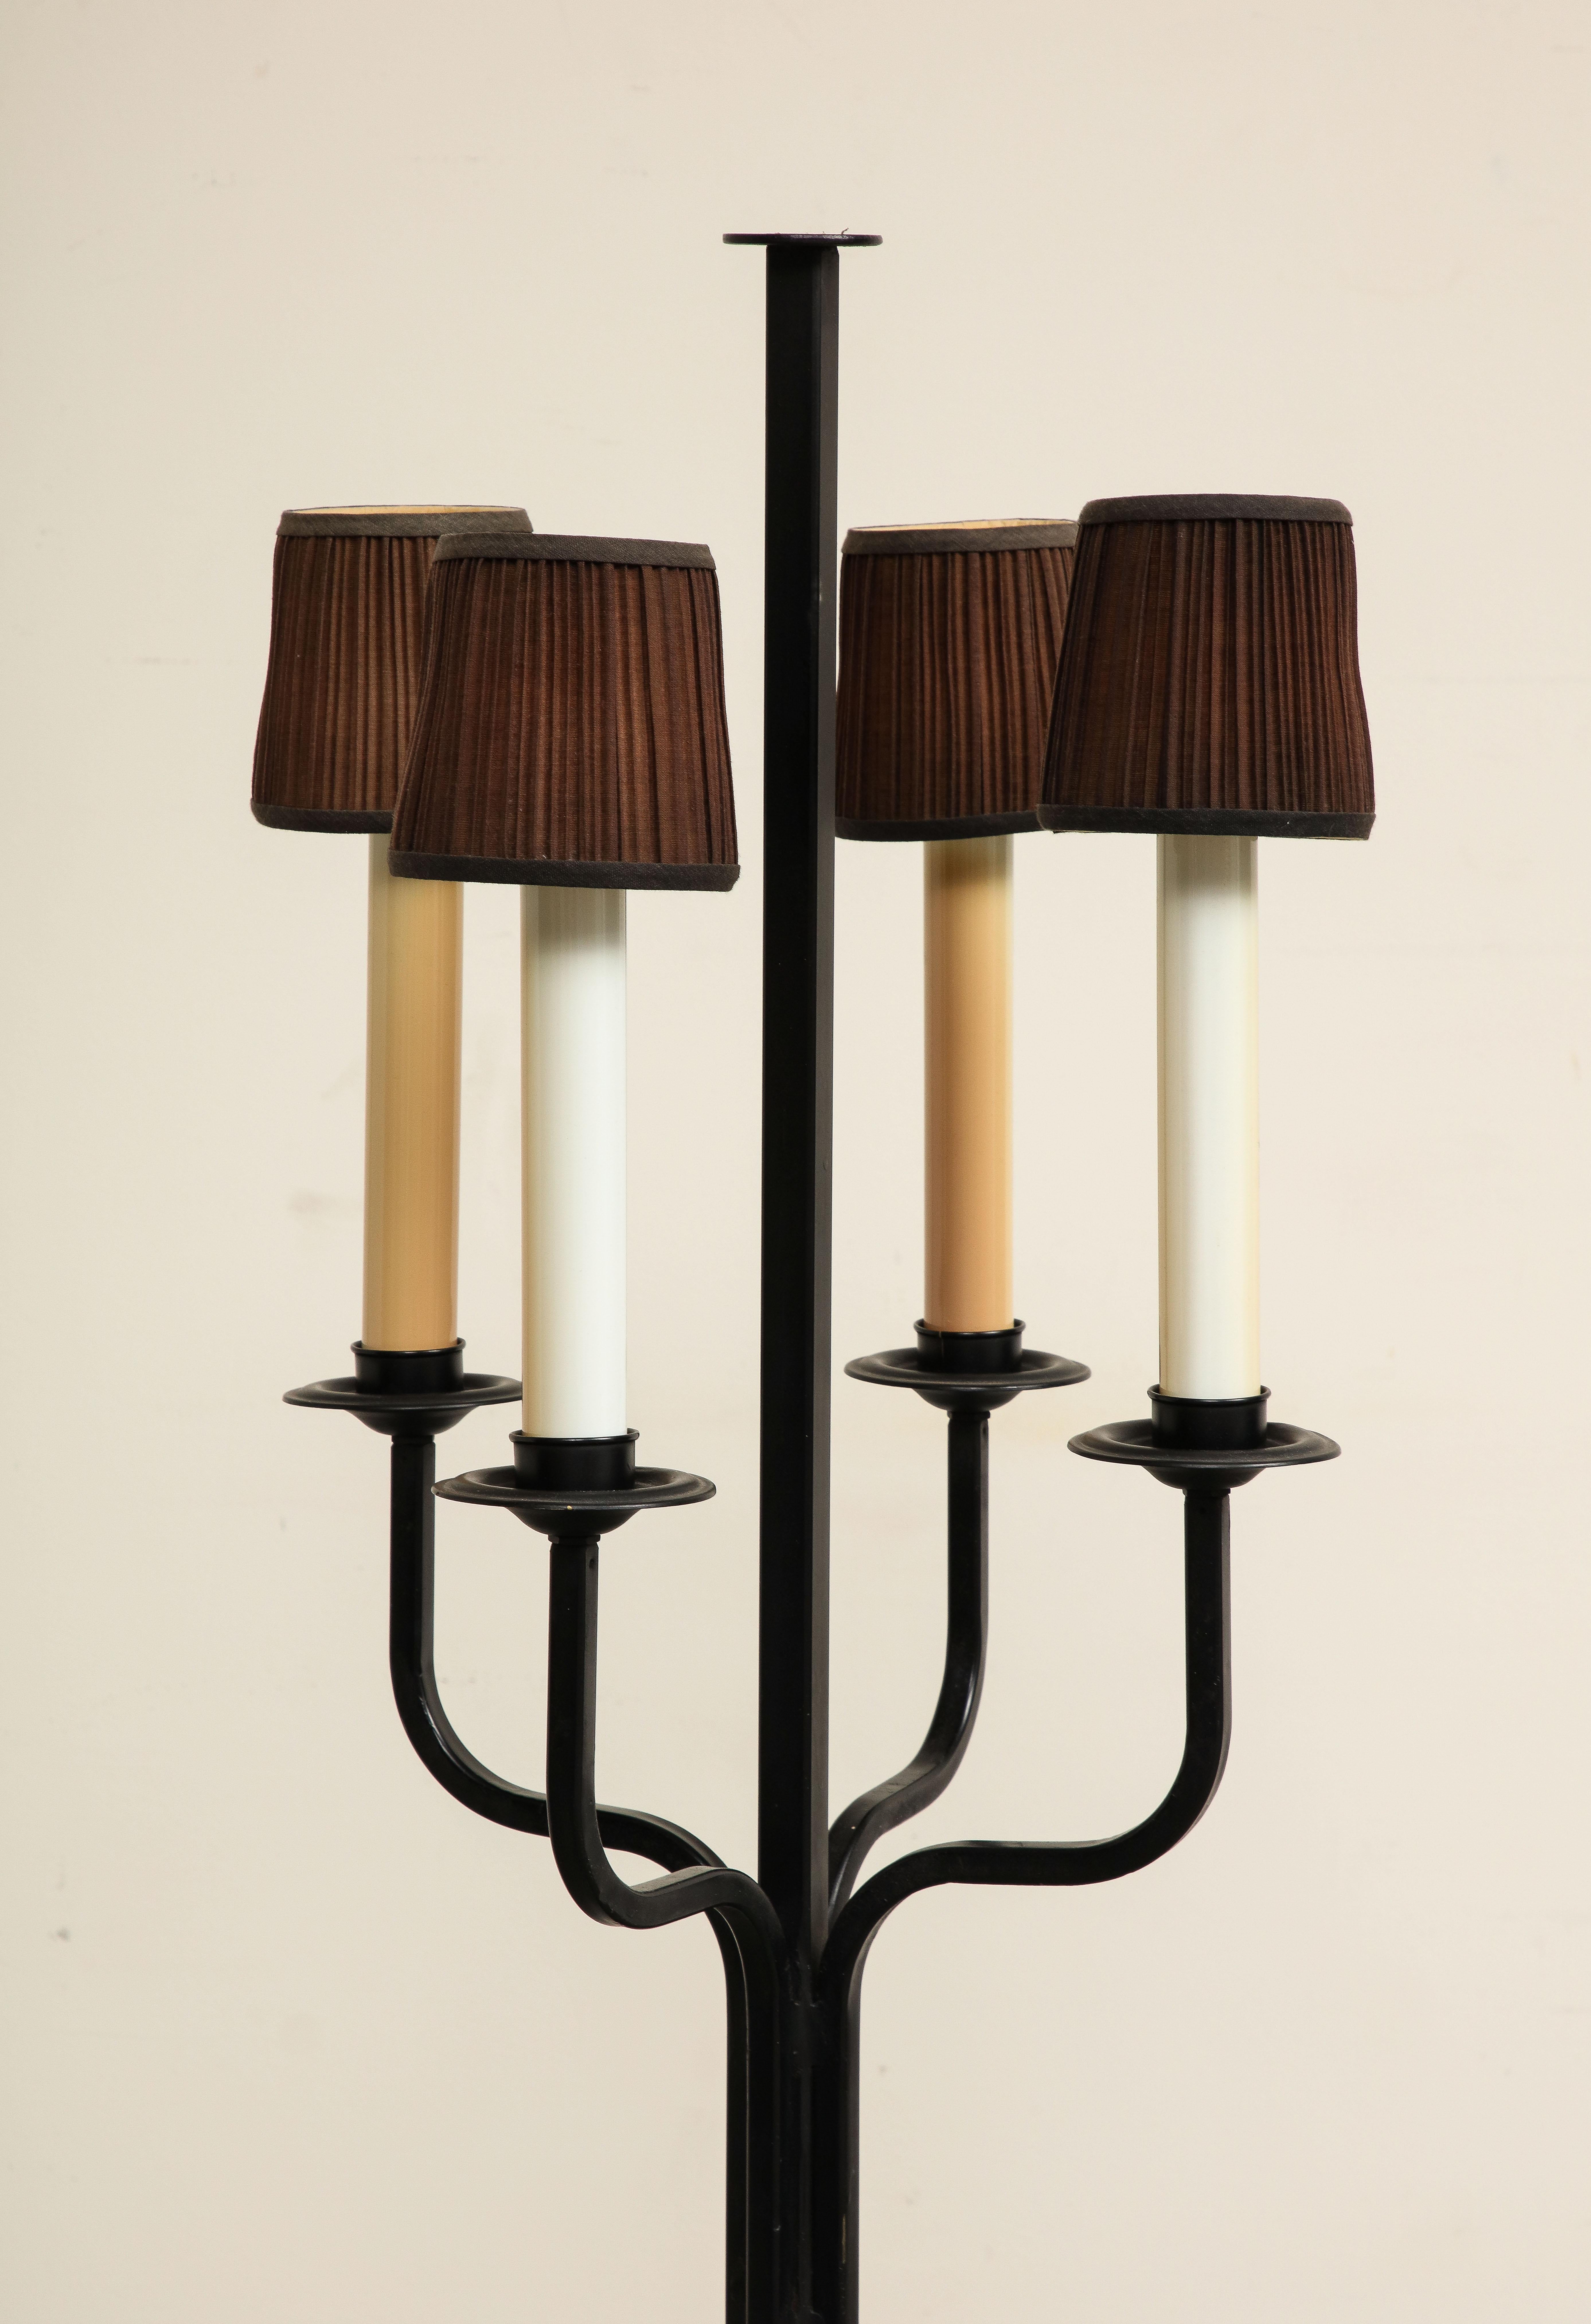 Midcentury Iron Candlestick Floor Lamp, attributed to Tommi Parzinger For Sale 1